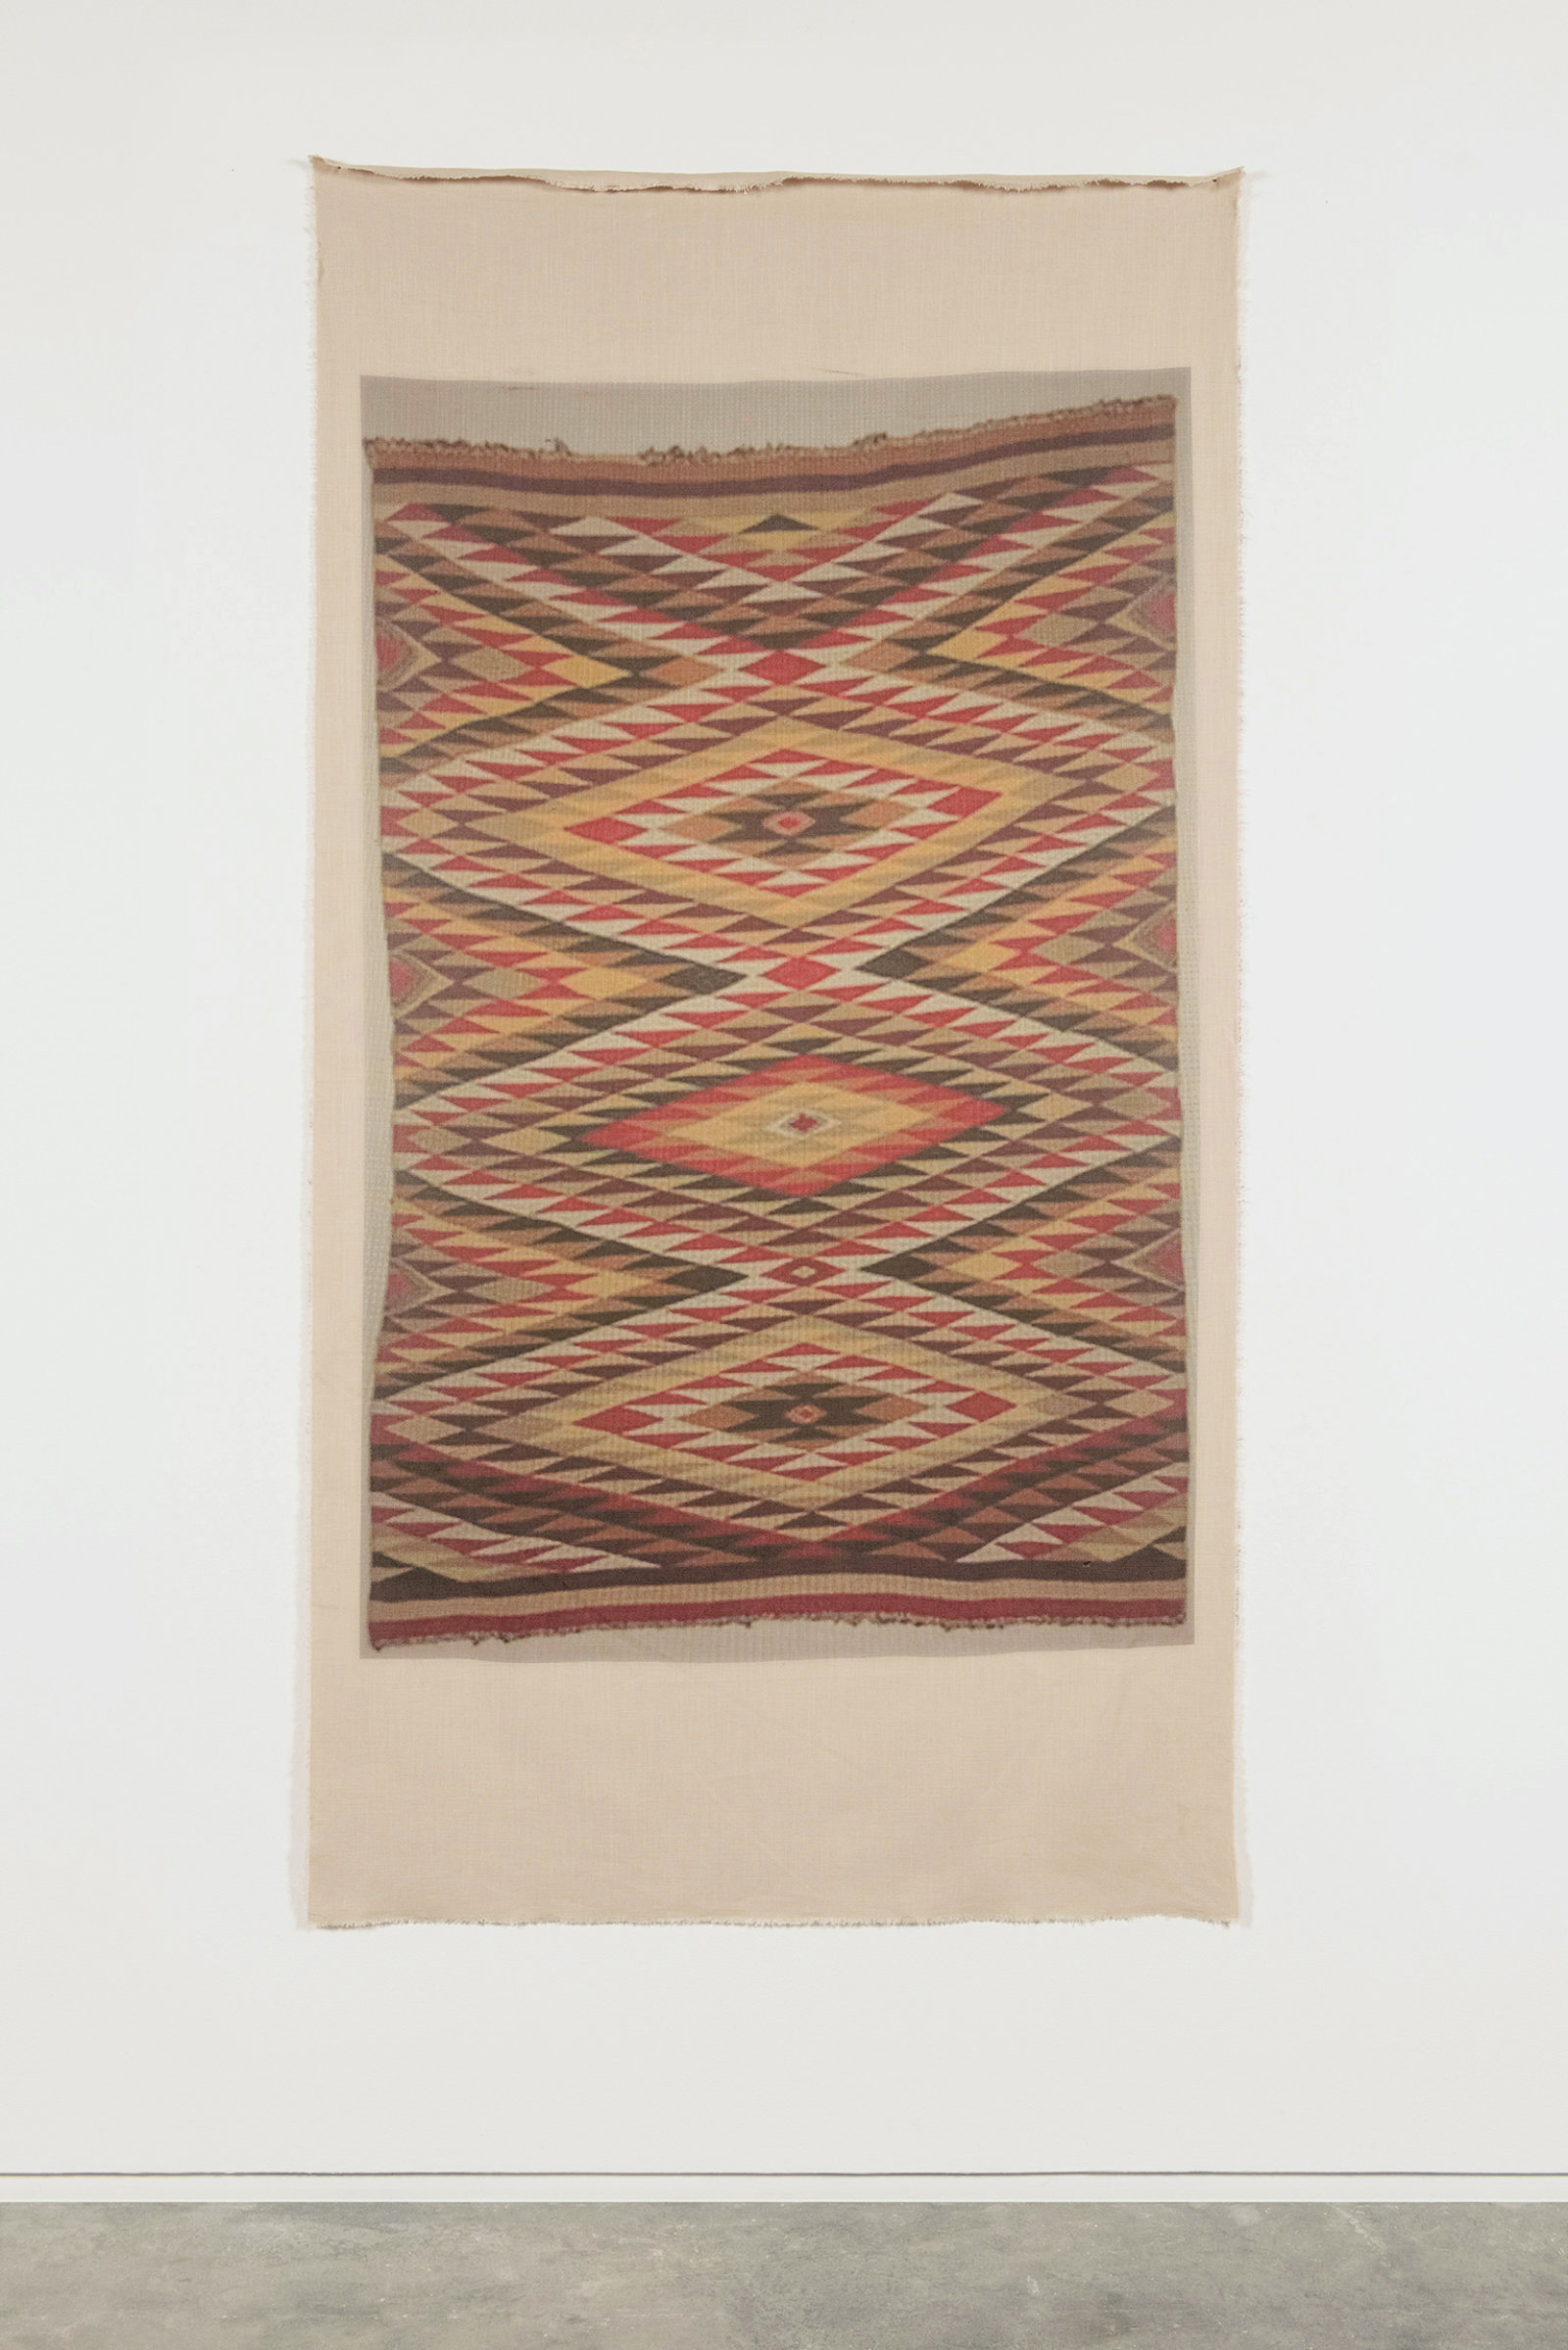 Duane Linklater, UMFA 1975.078.020.013, 2015, inkjet print on linen, nails, from Navajo Rug, Utah Museum of Fine Arts Collection, 85 x 44 in. (216 x 112 cm)